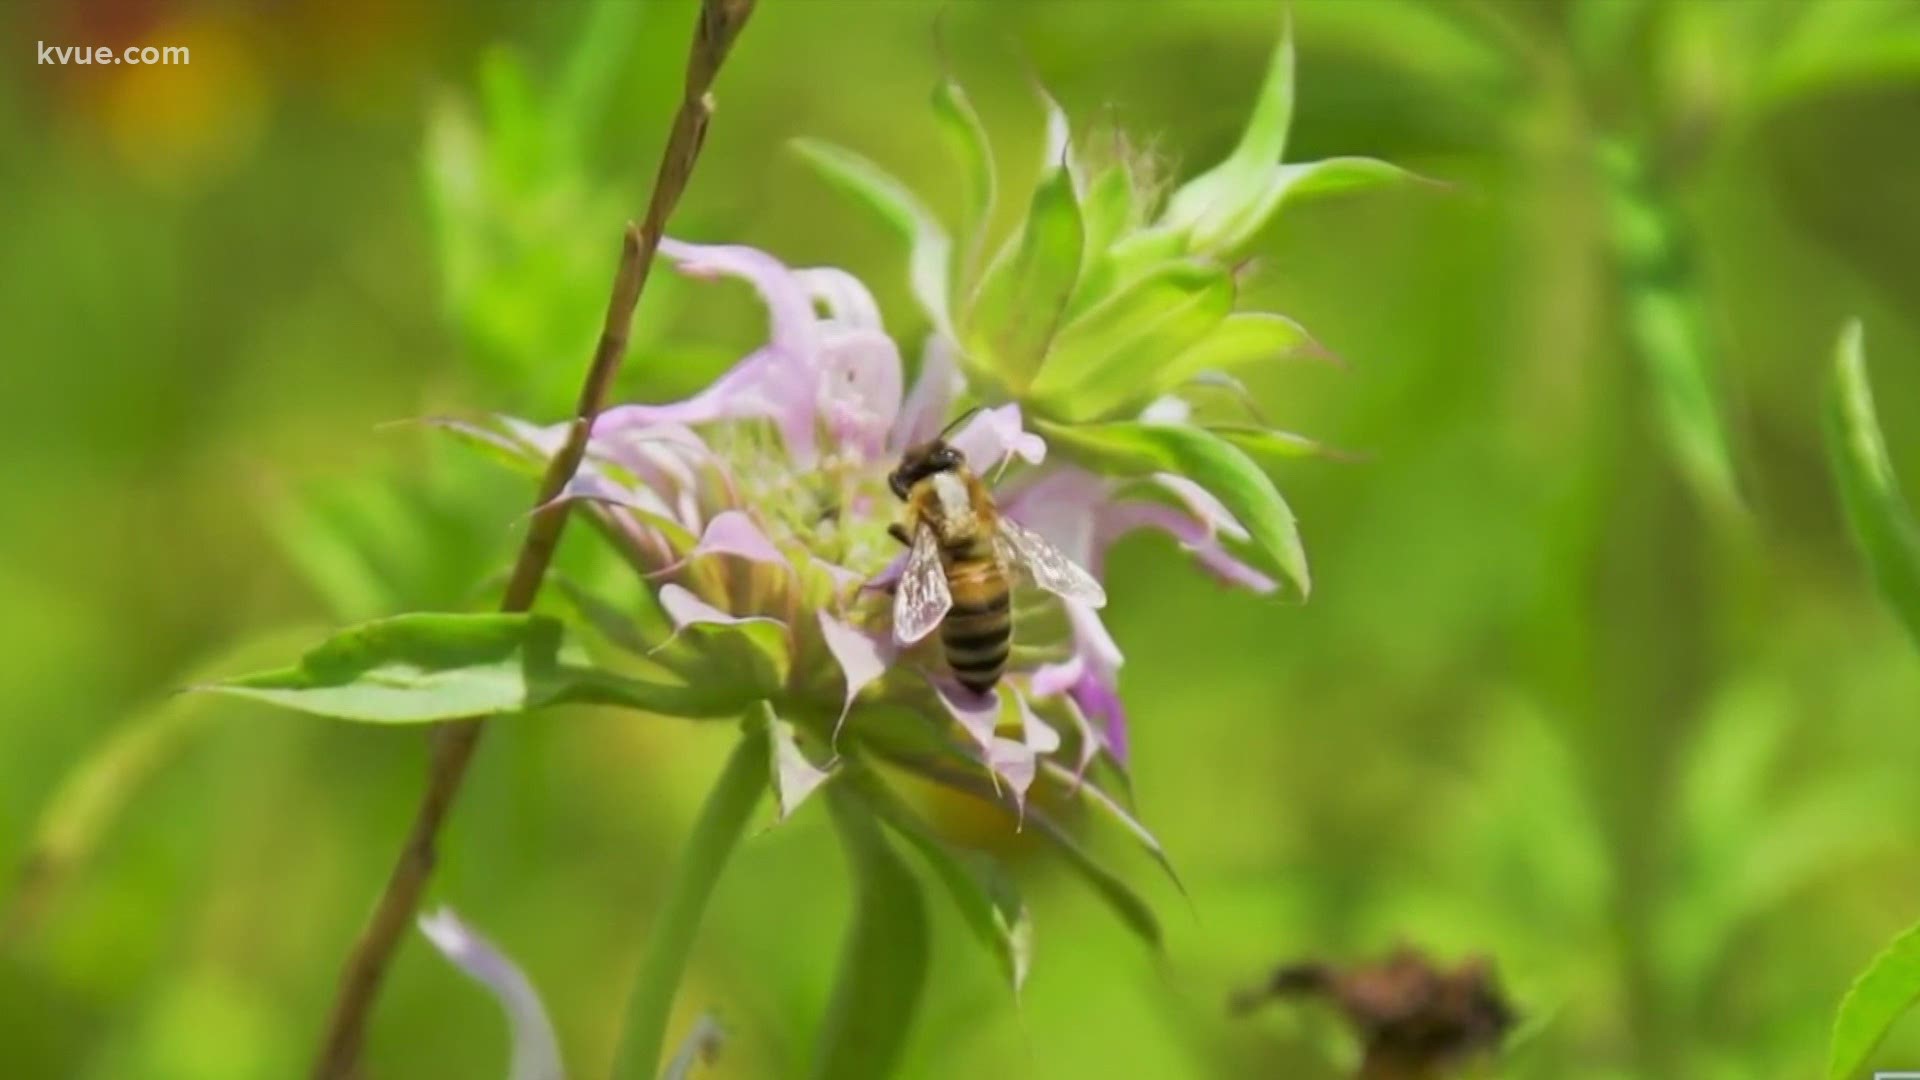 This spring, Texas lawmakers could take more steps to help the state's dwindling bee population. Without action, we could face serious problems.